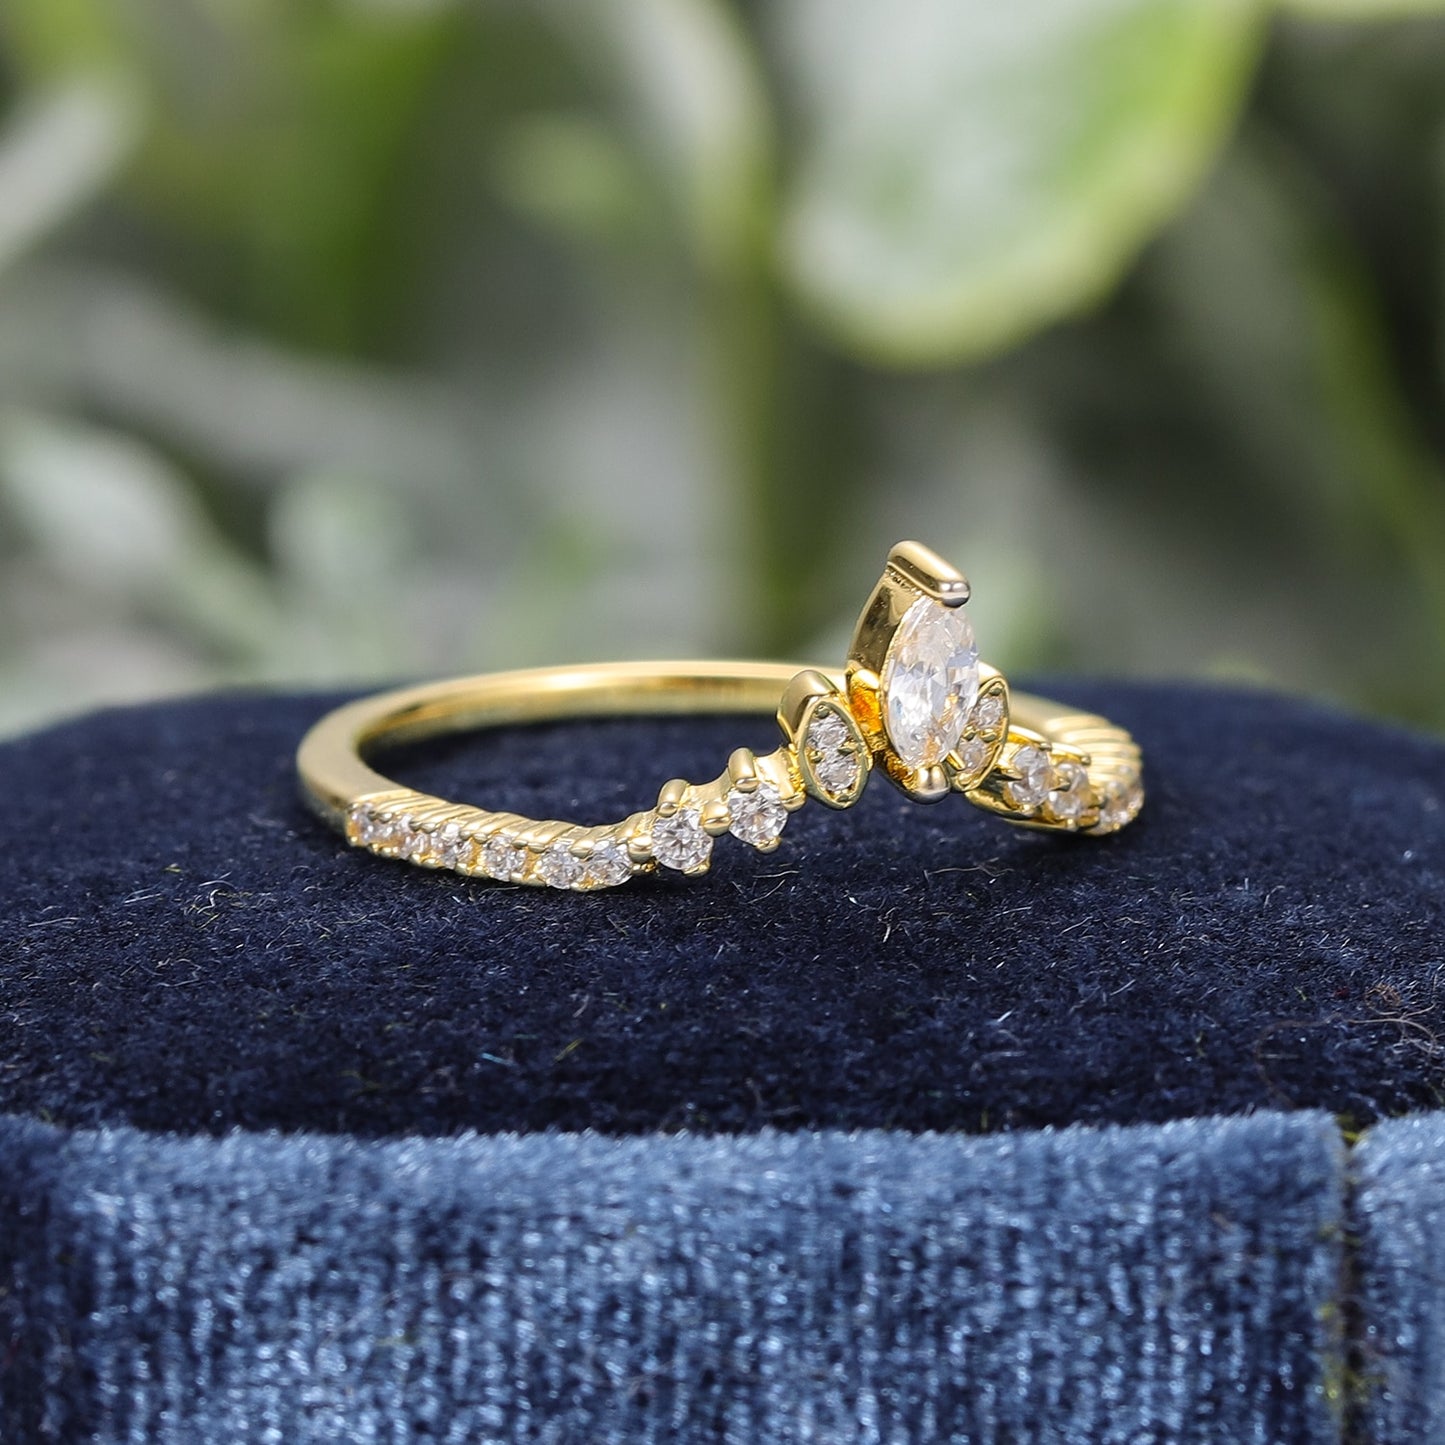 A gold chevron style wedding ring set with several small round moissanites set horizontally and two bezel set moissanites and one larger prong set moissanite at the V.